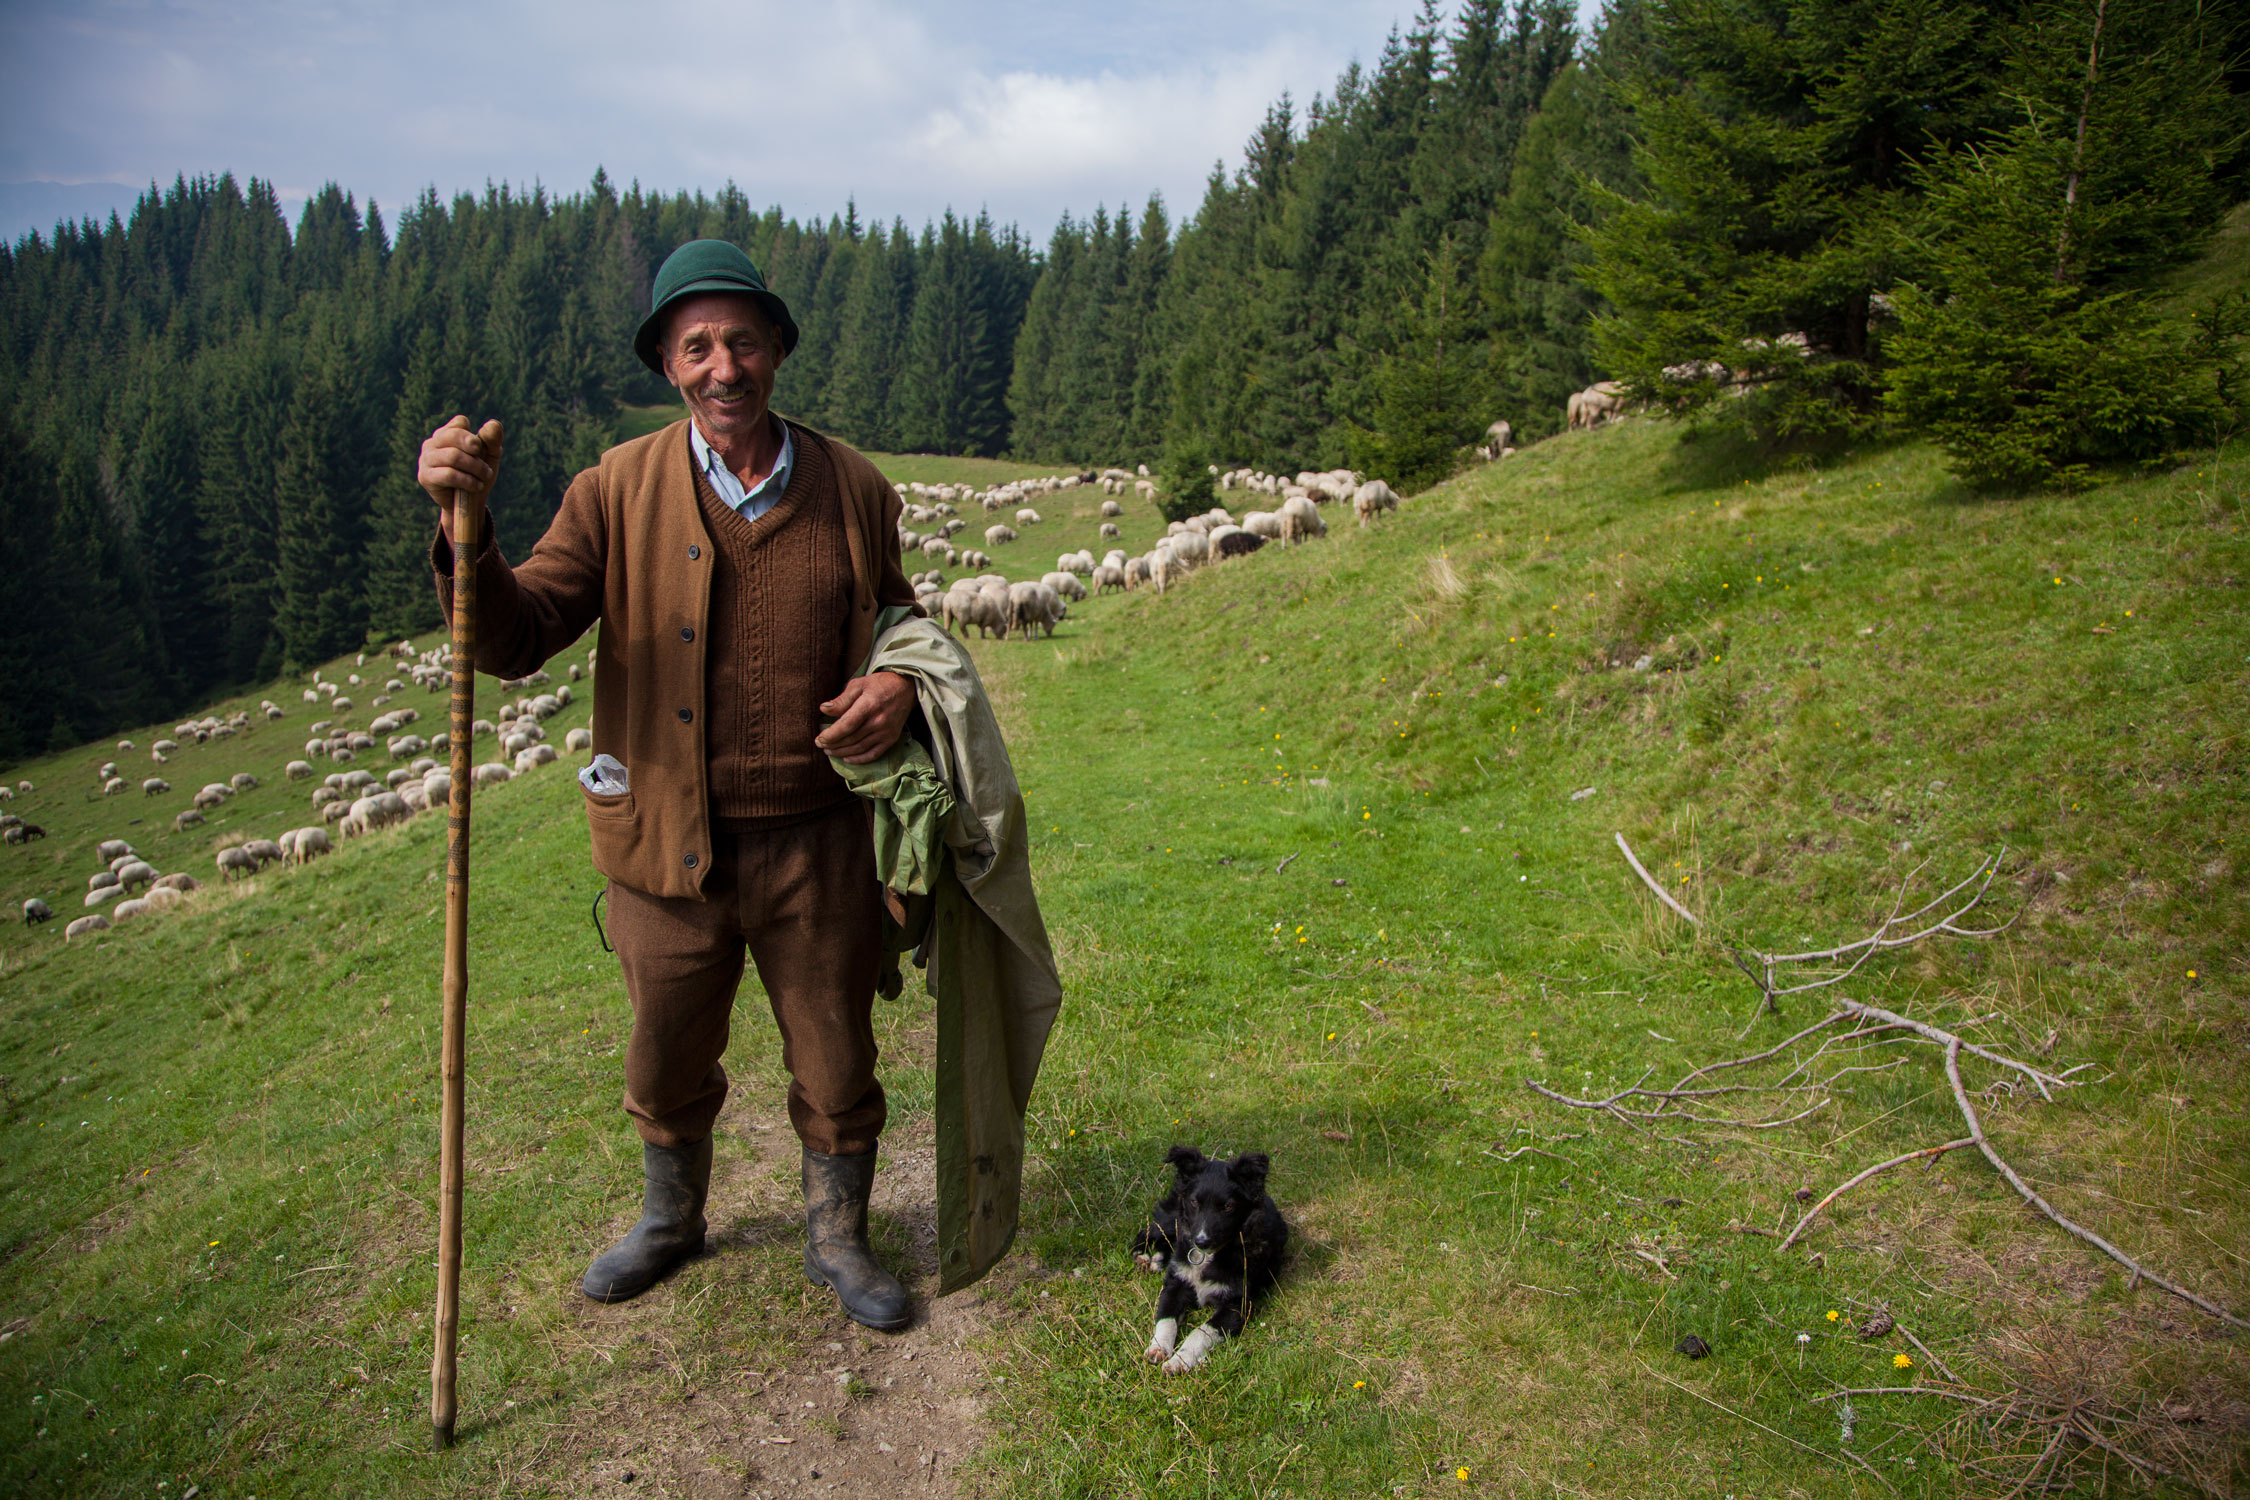 Romanian shepherd and his dog - photo by Cinty Ionescu and featured in this album on Flickr and shared under a CC BY 2.0 Creative Commons License